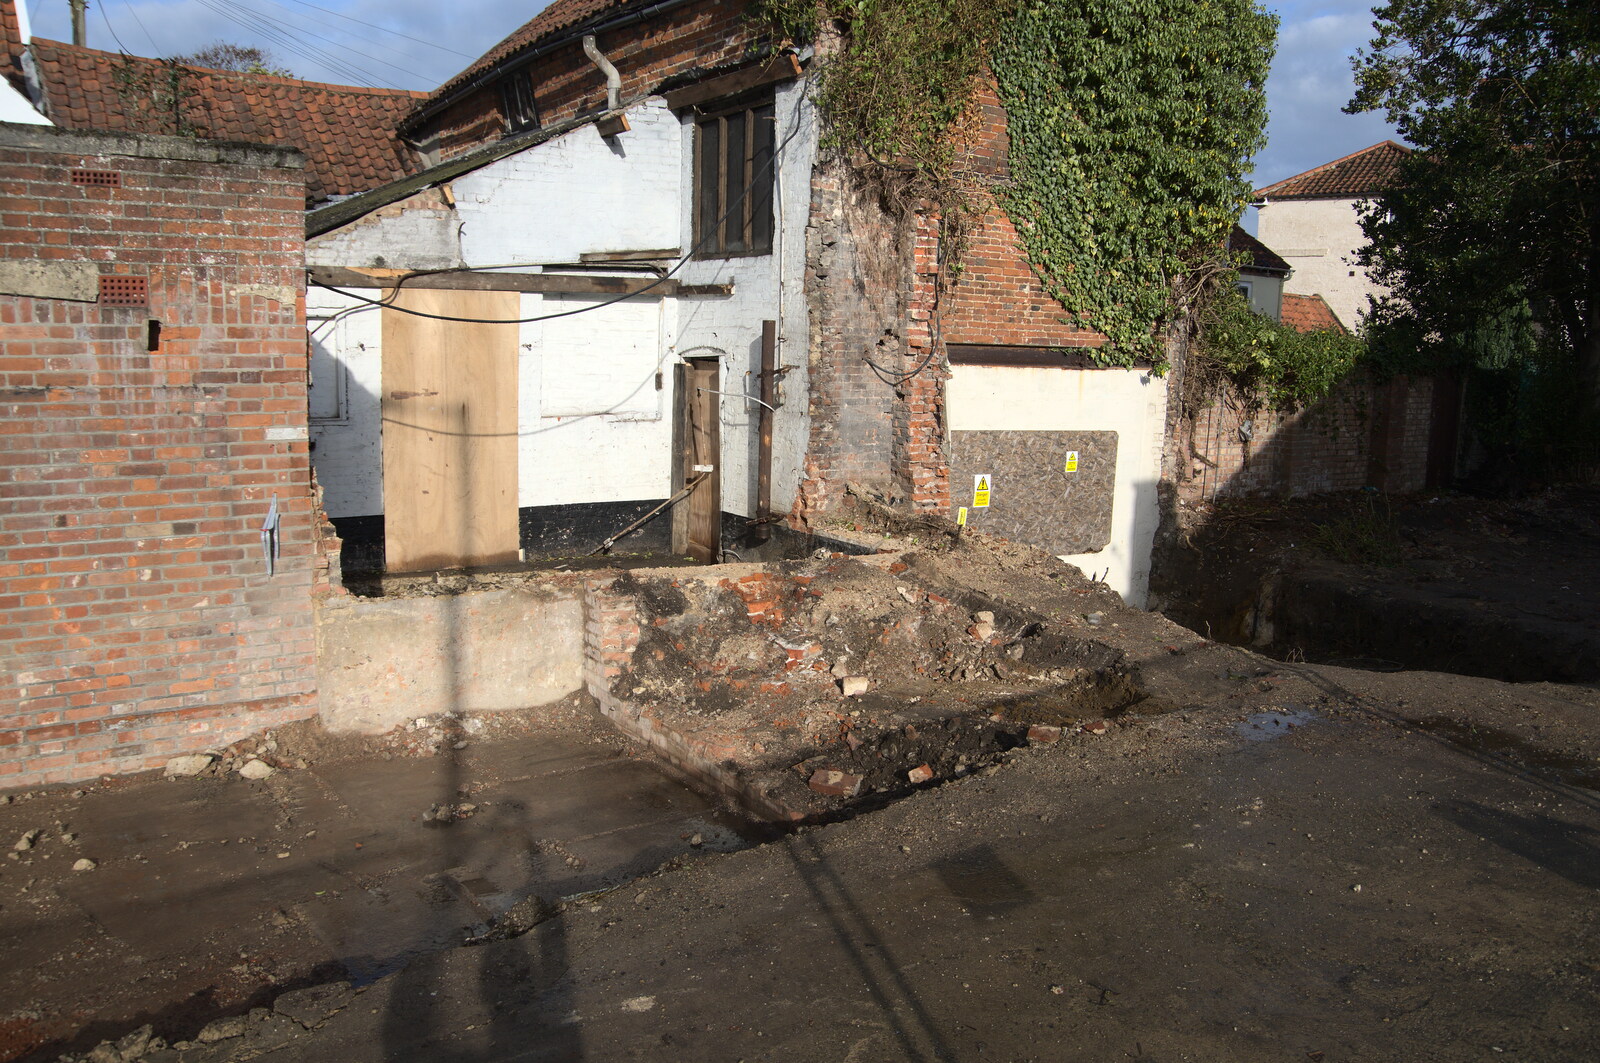 An Afternoon in Beccles, Suffolk - 26th October 2022: A derelict cottage, part demolished